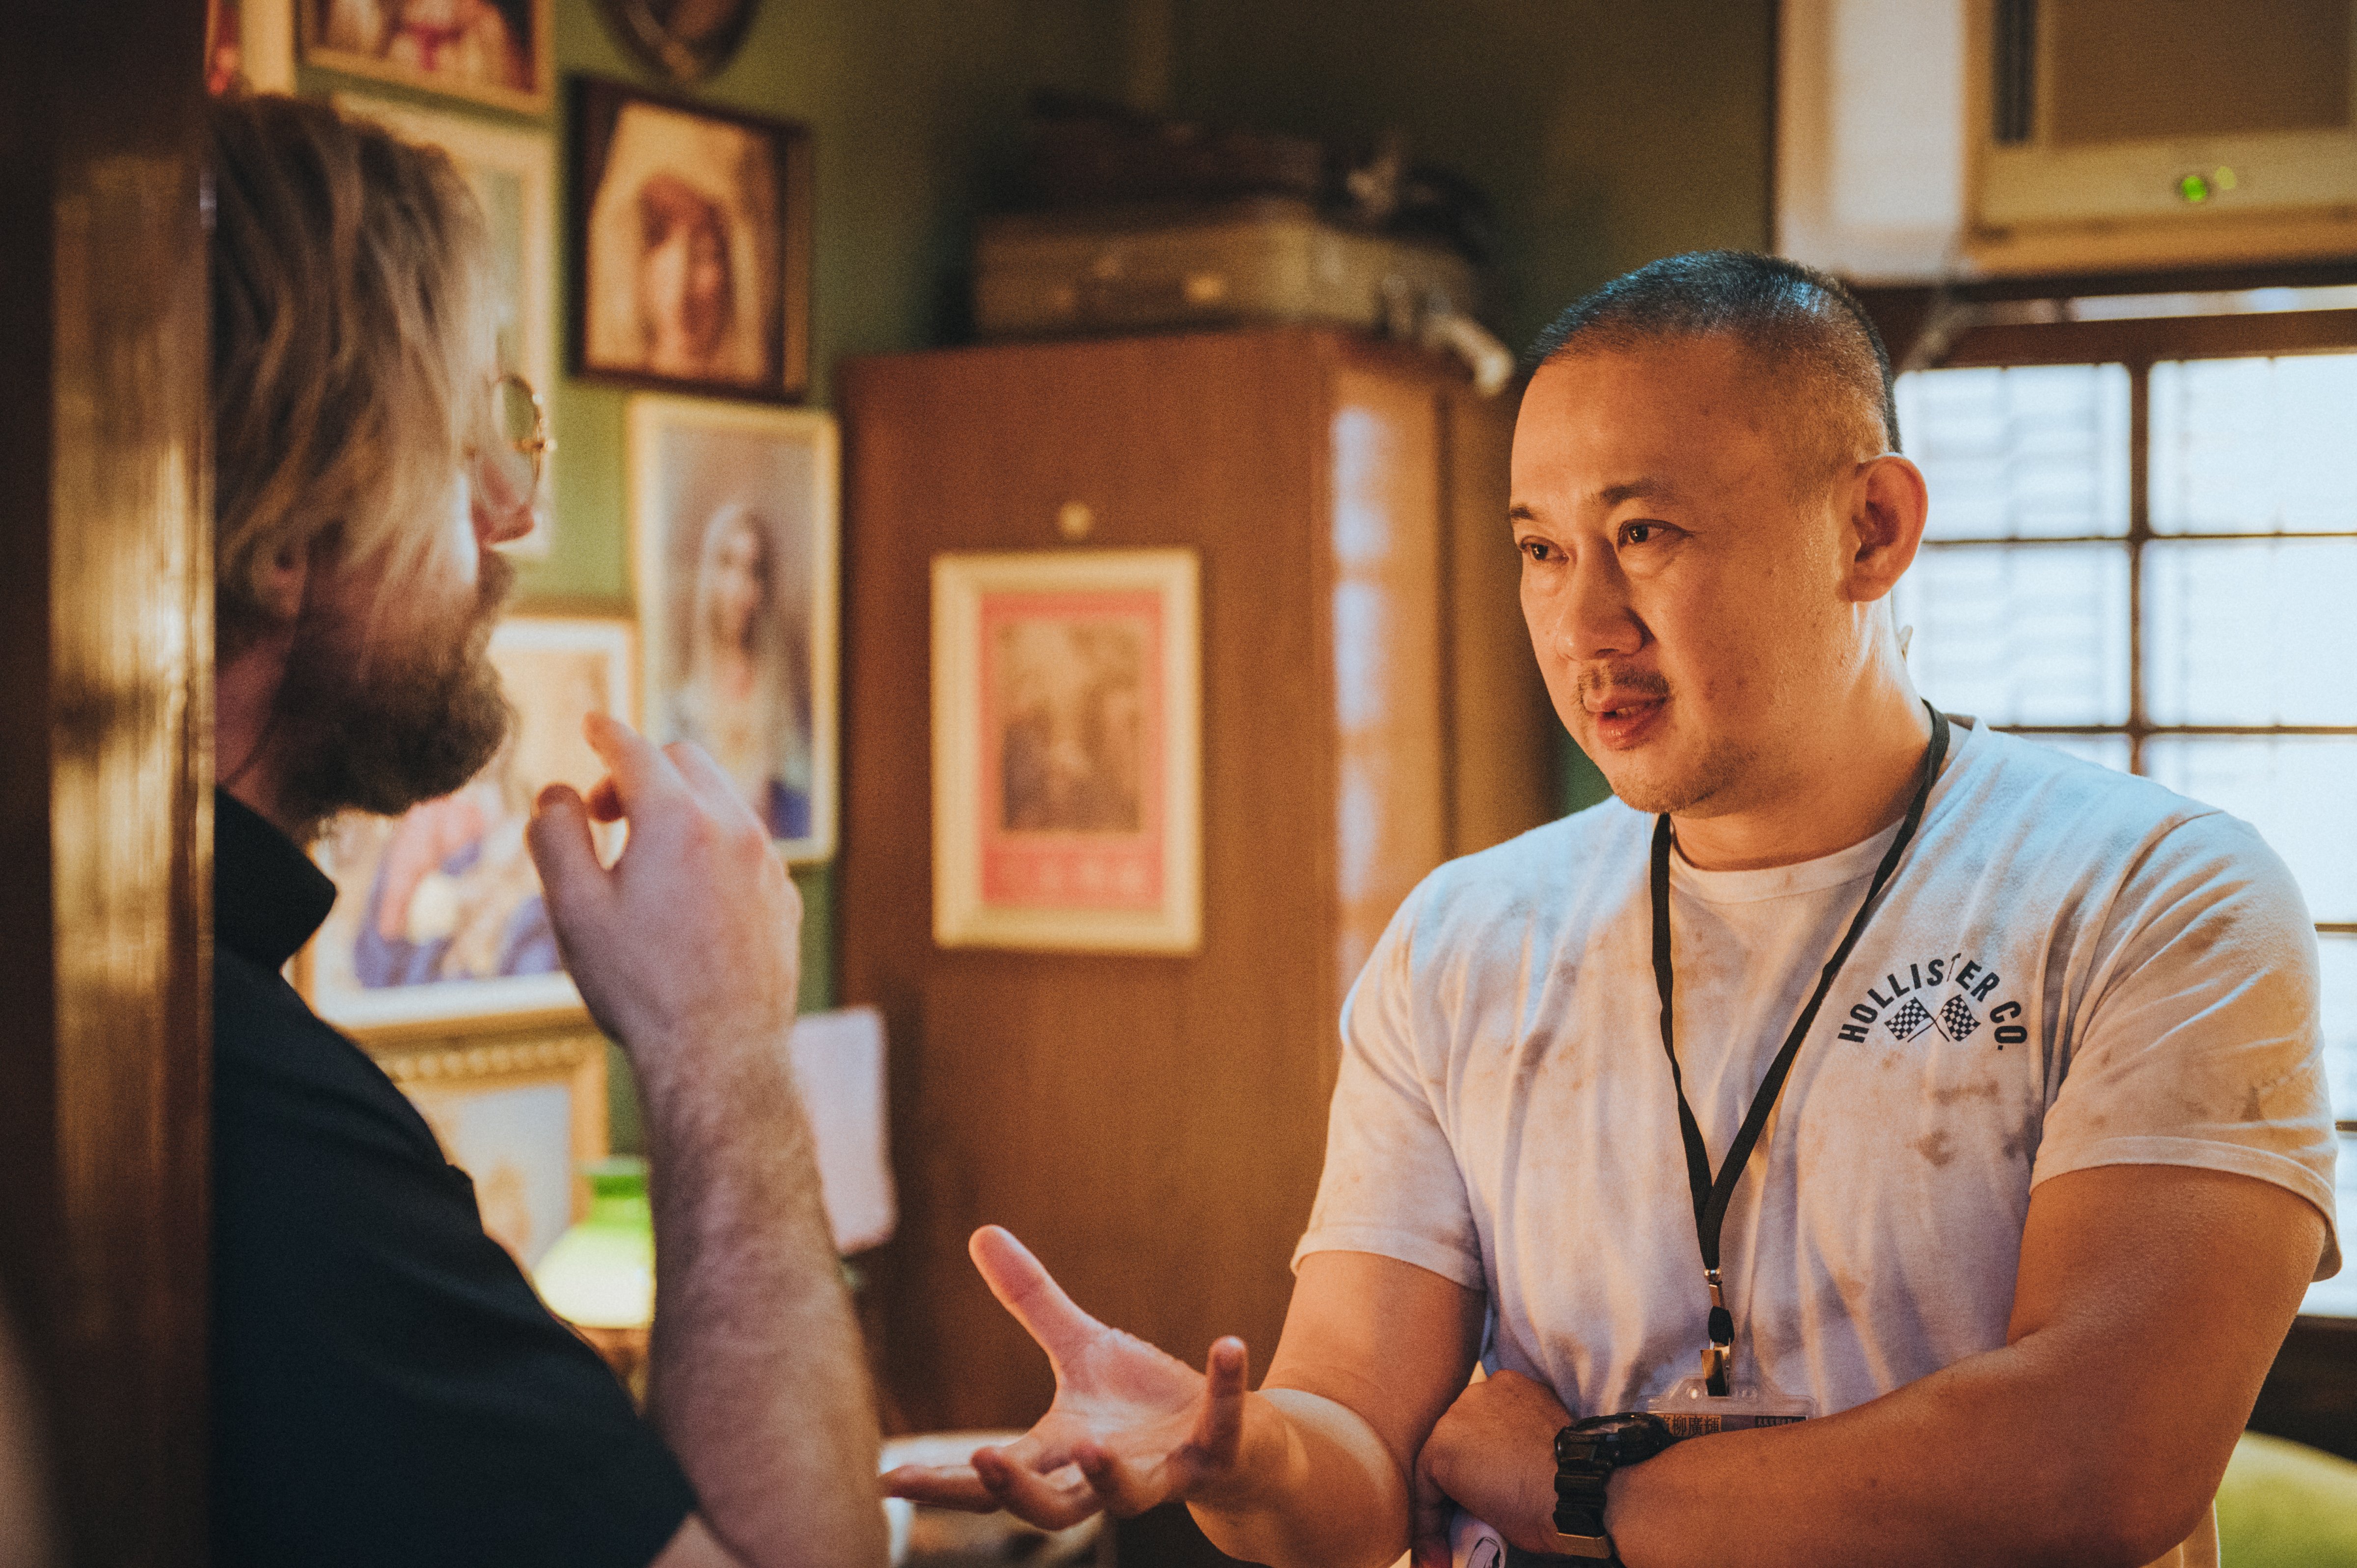 Director Patrick Liu on set for 'Your Name Engraved Herein' (Courtesy of Oxygen Films)